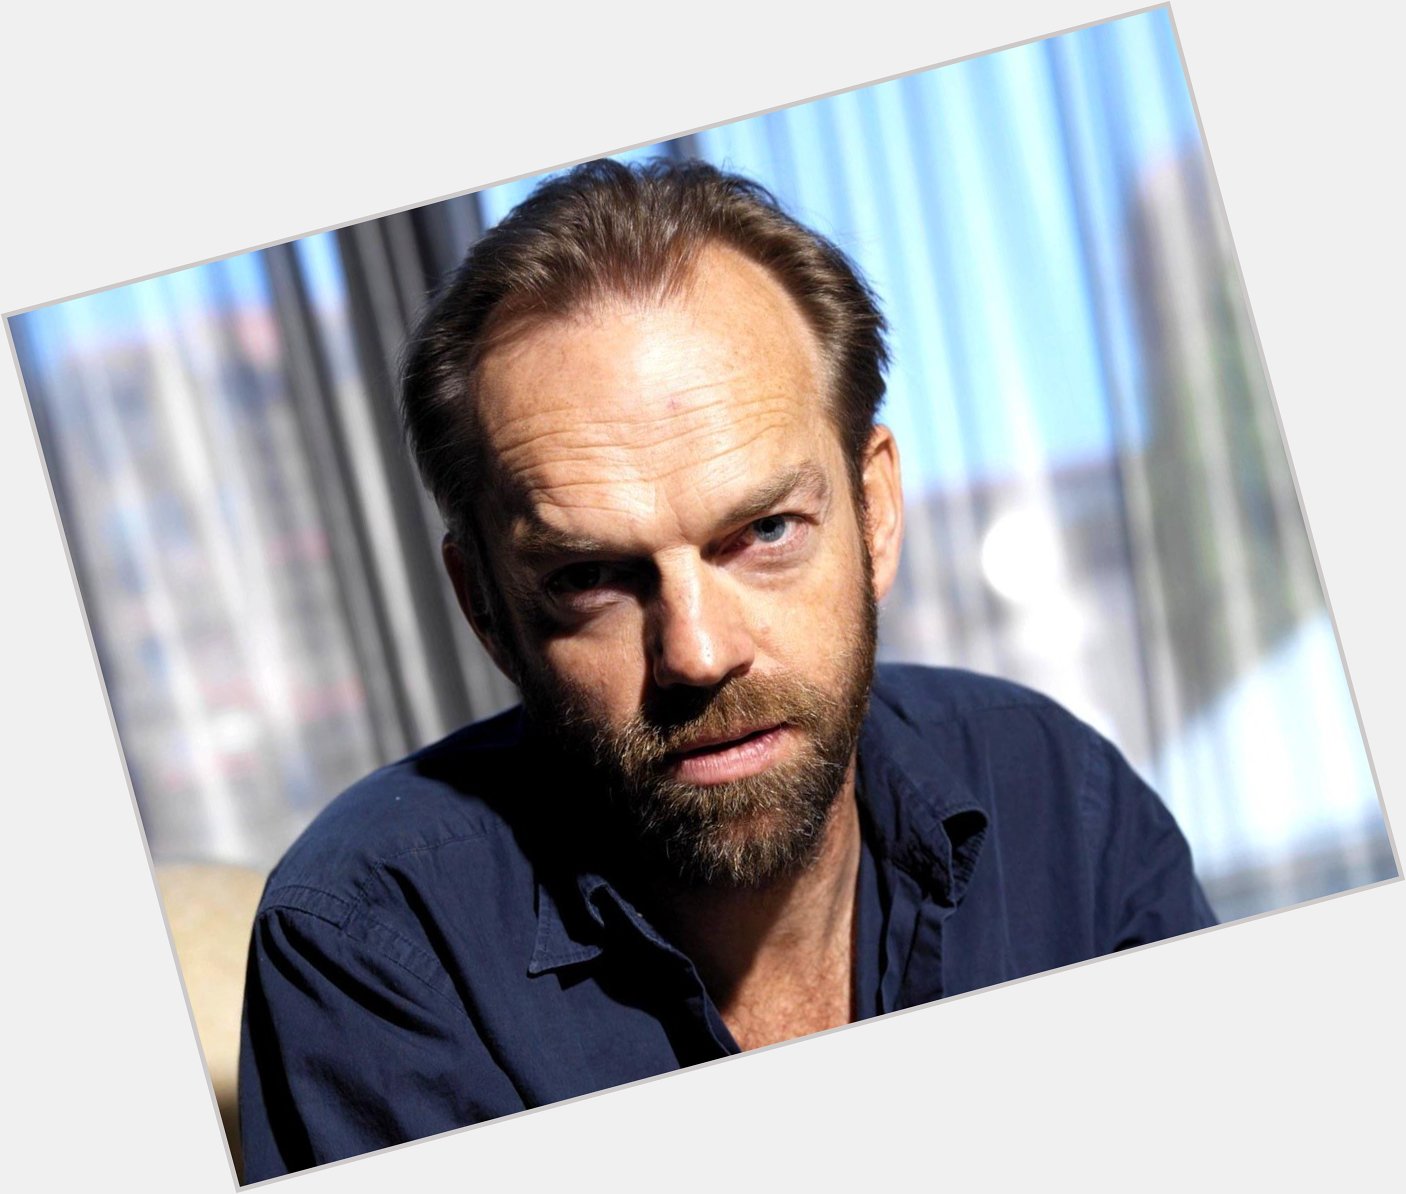 From to and so much more, a very happy birthday to remarkable talent, Mr. Hugo Weaving 